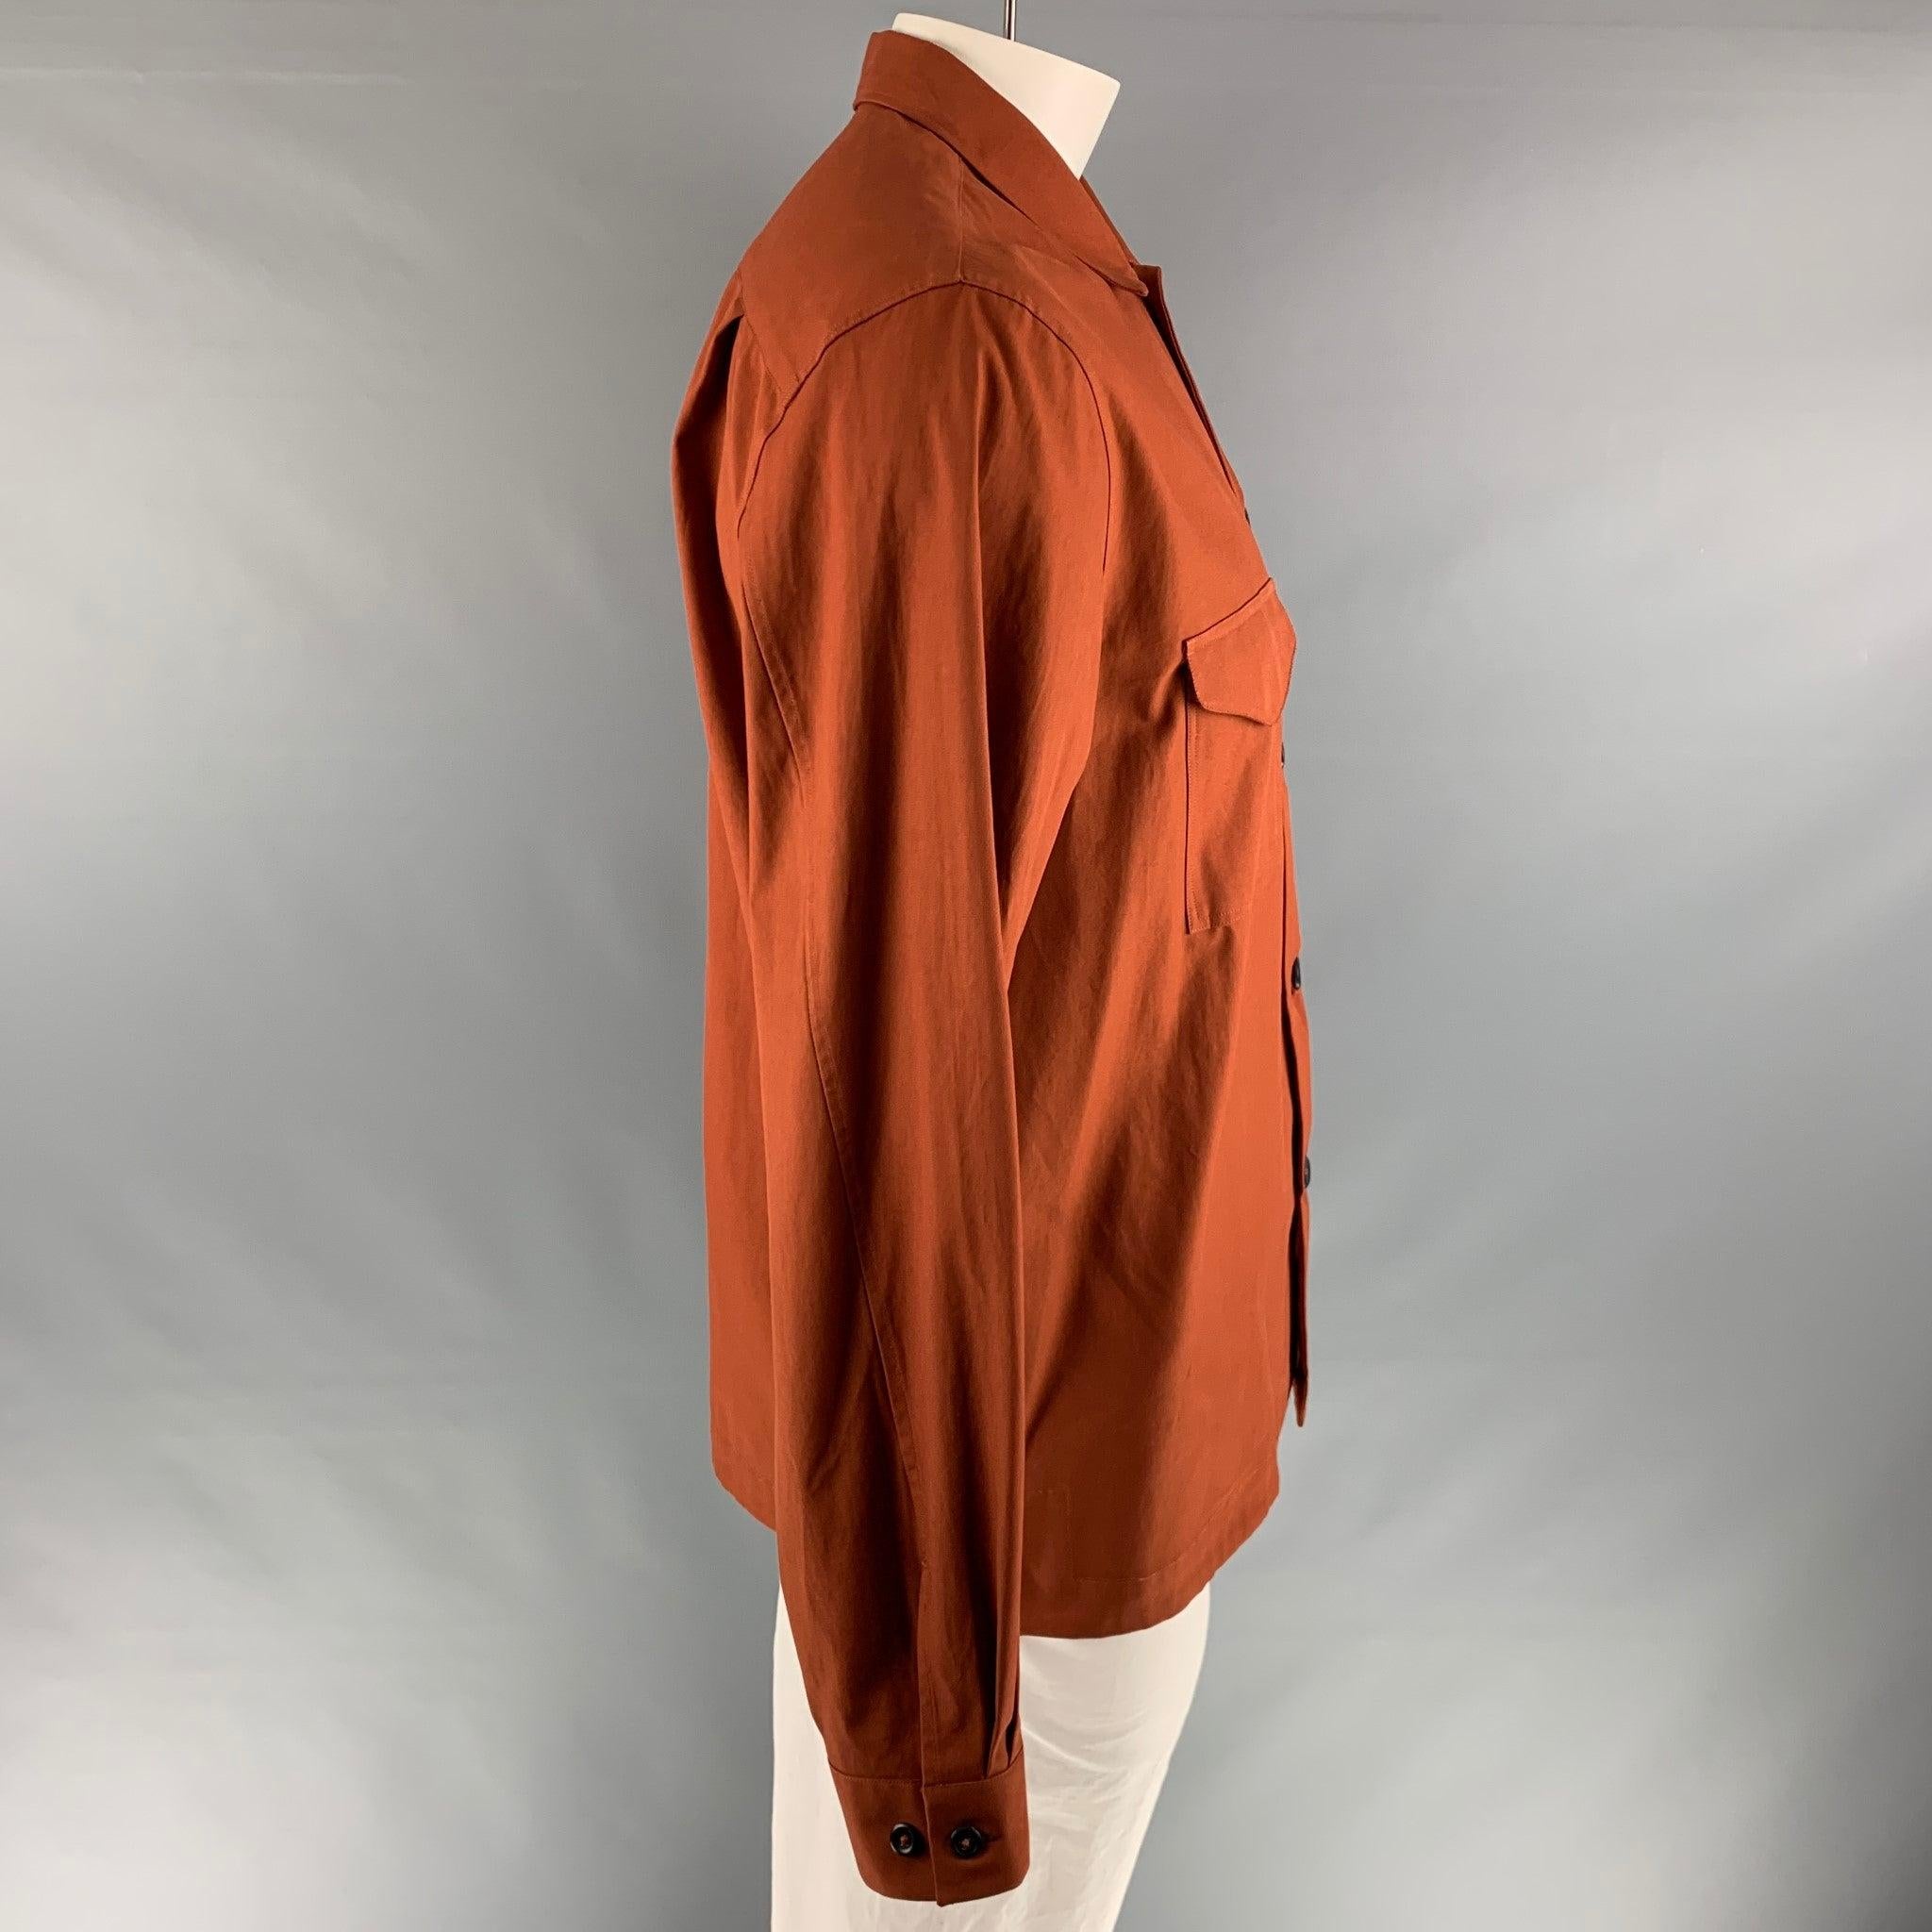 PAUL SMITH uniform style long sleeve shirt comes in a rustic orange cotton, featuring patch pockets, a button closure, and an oversized fit. Made in Italy.Very Good Pre-Owned Condition. 

Marked:   L 

Measurements: 
 
Shoulder: 19 inches Chest: 46